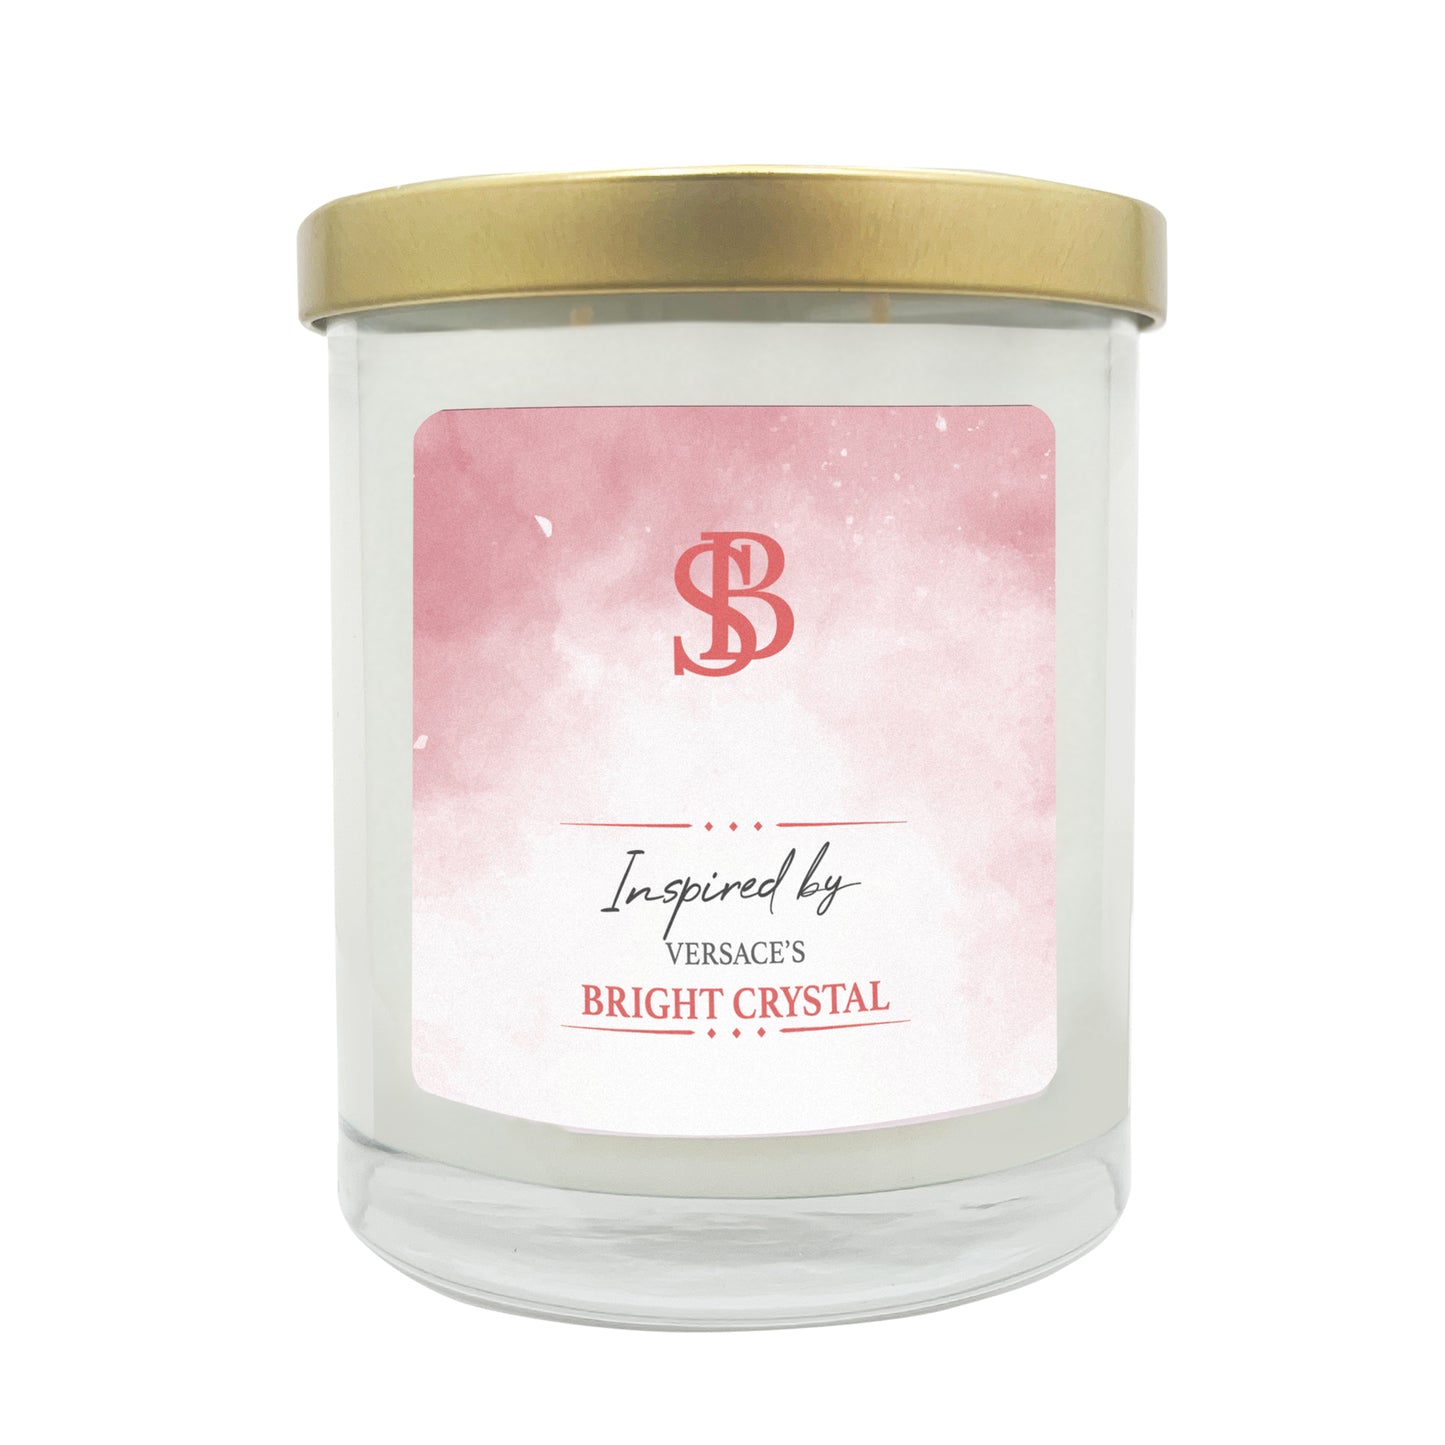 INSPIRED BY VERSACE'S BRIGHT CRYSTAL | Soy Scented Candle 11 oz